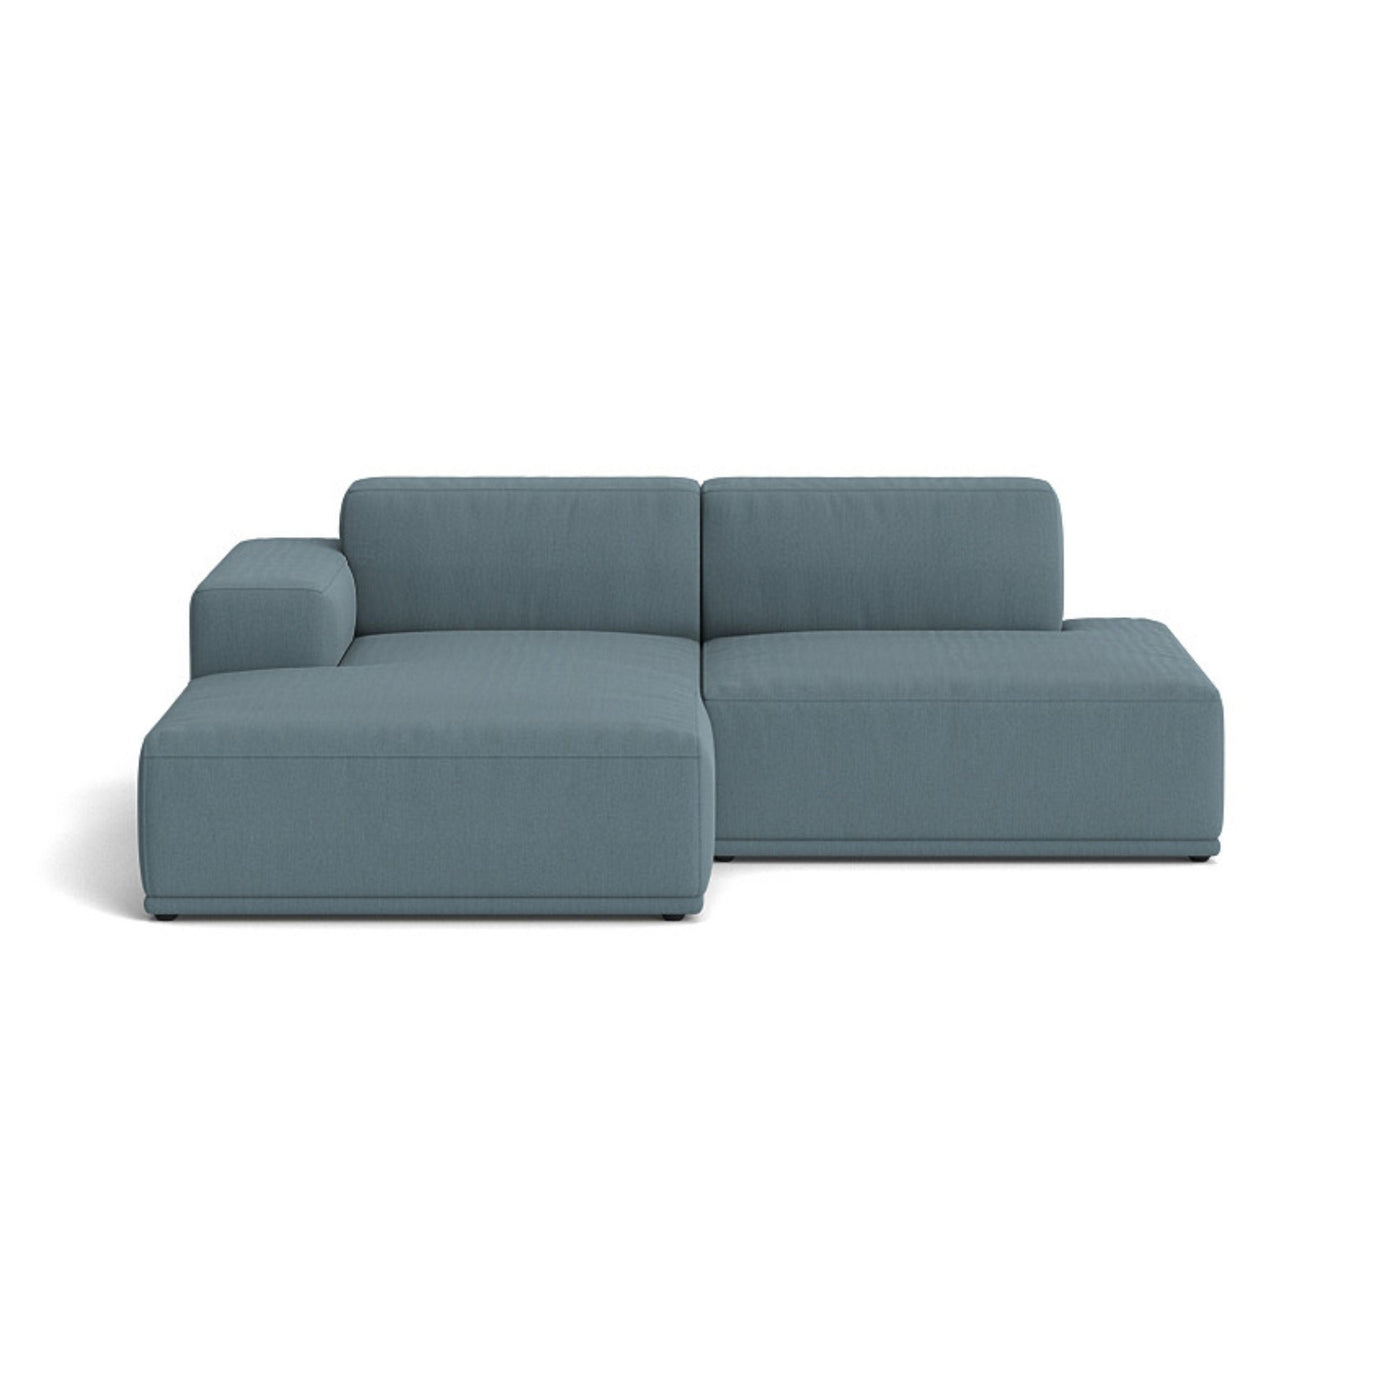 Muuto Connect Soft Modular 2 Seater Sofa, configuration 3. made-to-order from someday designs. #colour_re-wool-768